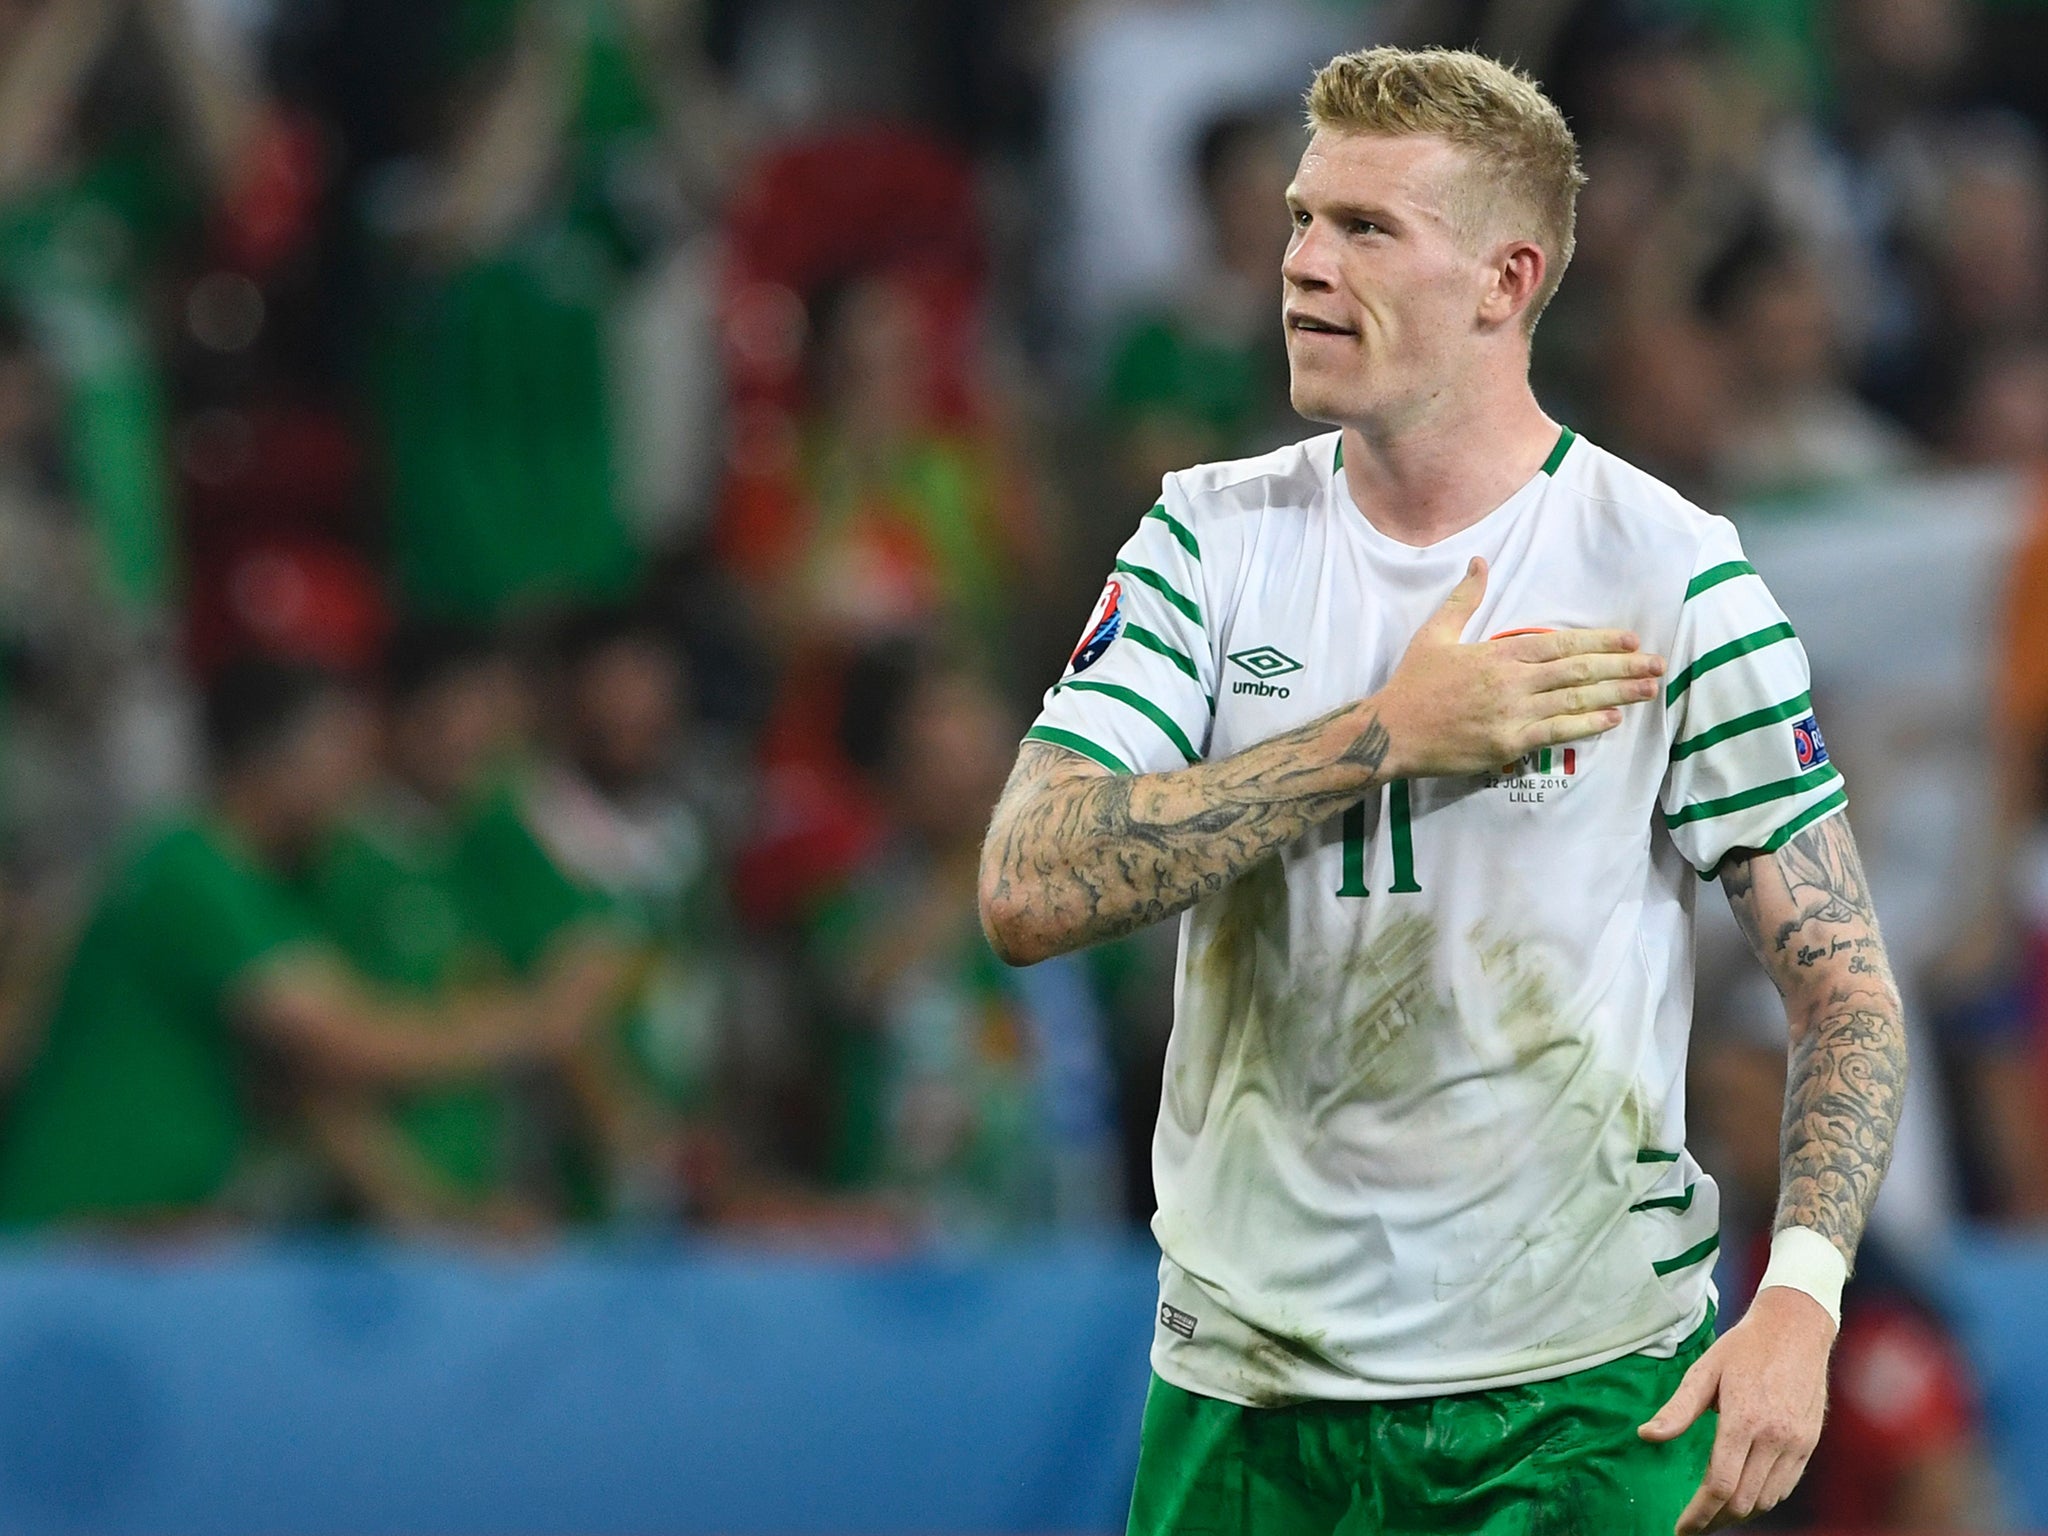 McClean will play for the Republic of Ireland against Wales on Friday